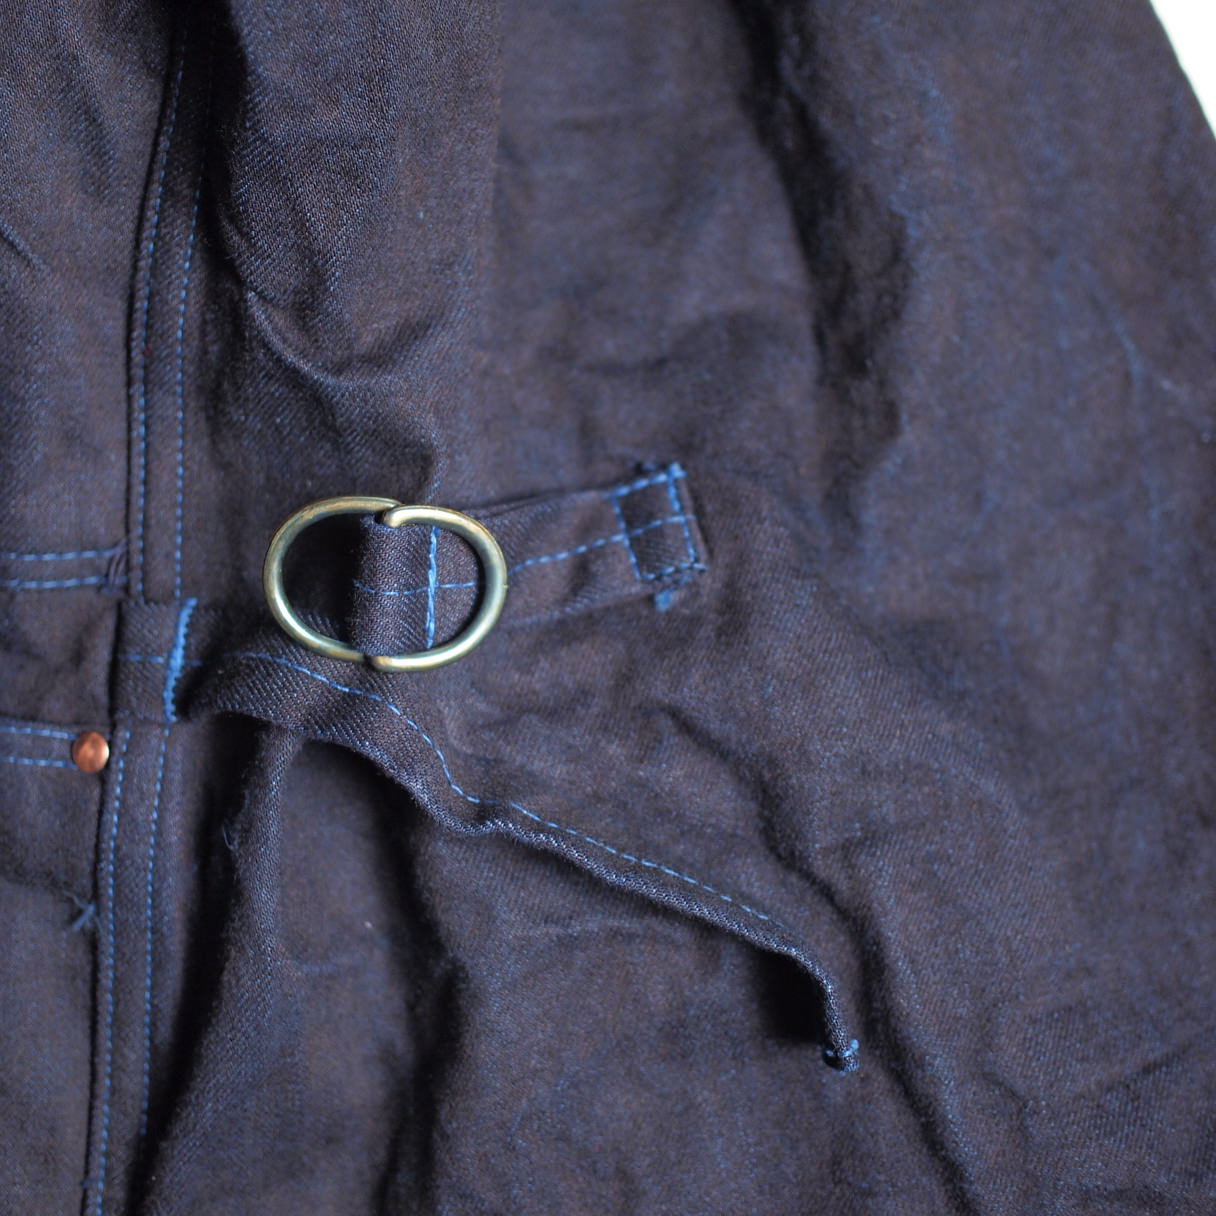 TENDER Co./TEN YEARS 900 JACKET | peau de l'ours（ポードルルス 